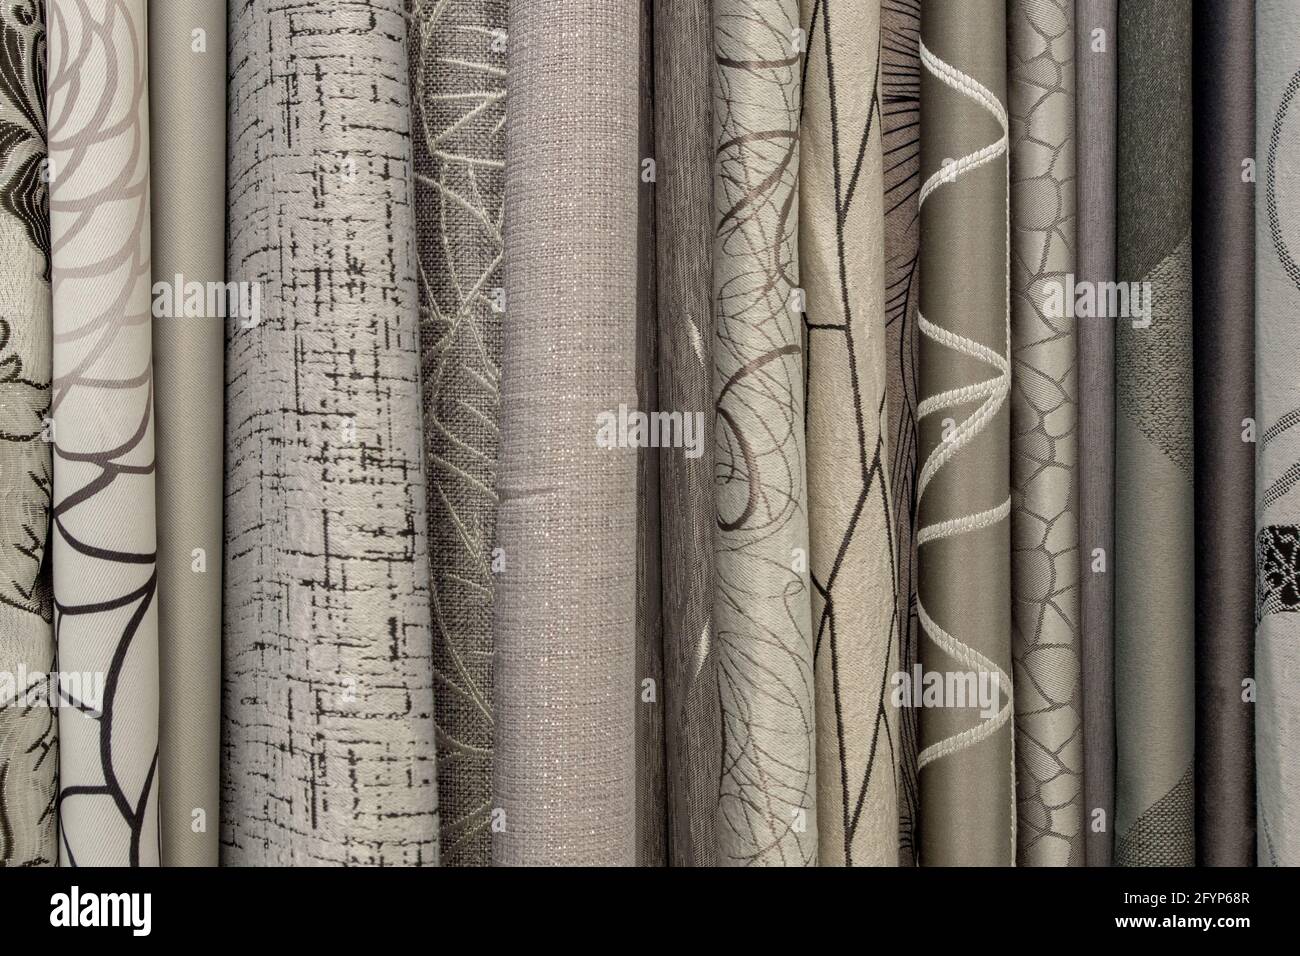 A fragment of the rounded ends of the edges hanging vertically in a row of fabric curtains in gray, beige and brown shades. Natural textile background Stock Photo